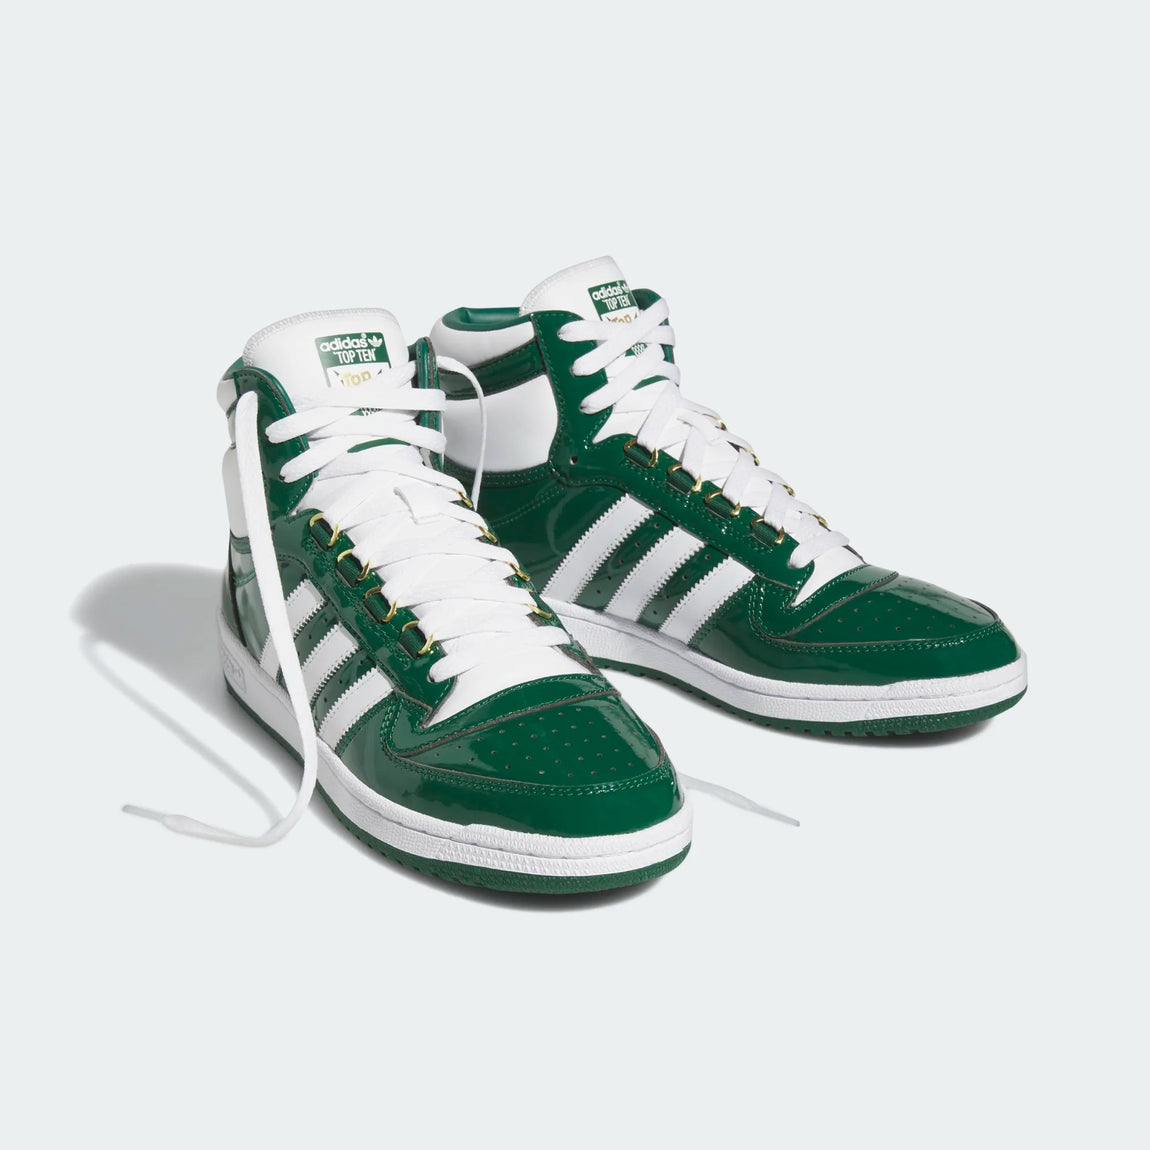 Adidas Top Ten RB Leather (Dark Green/Cloud White-Gold Centre